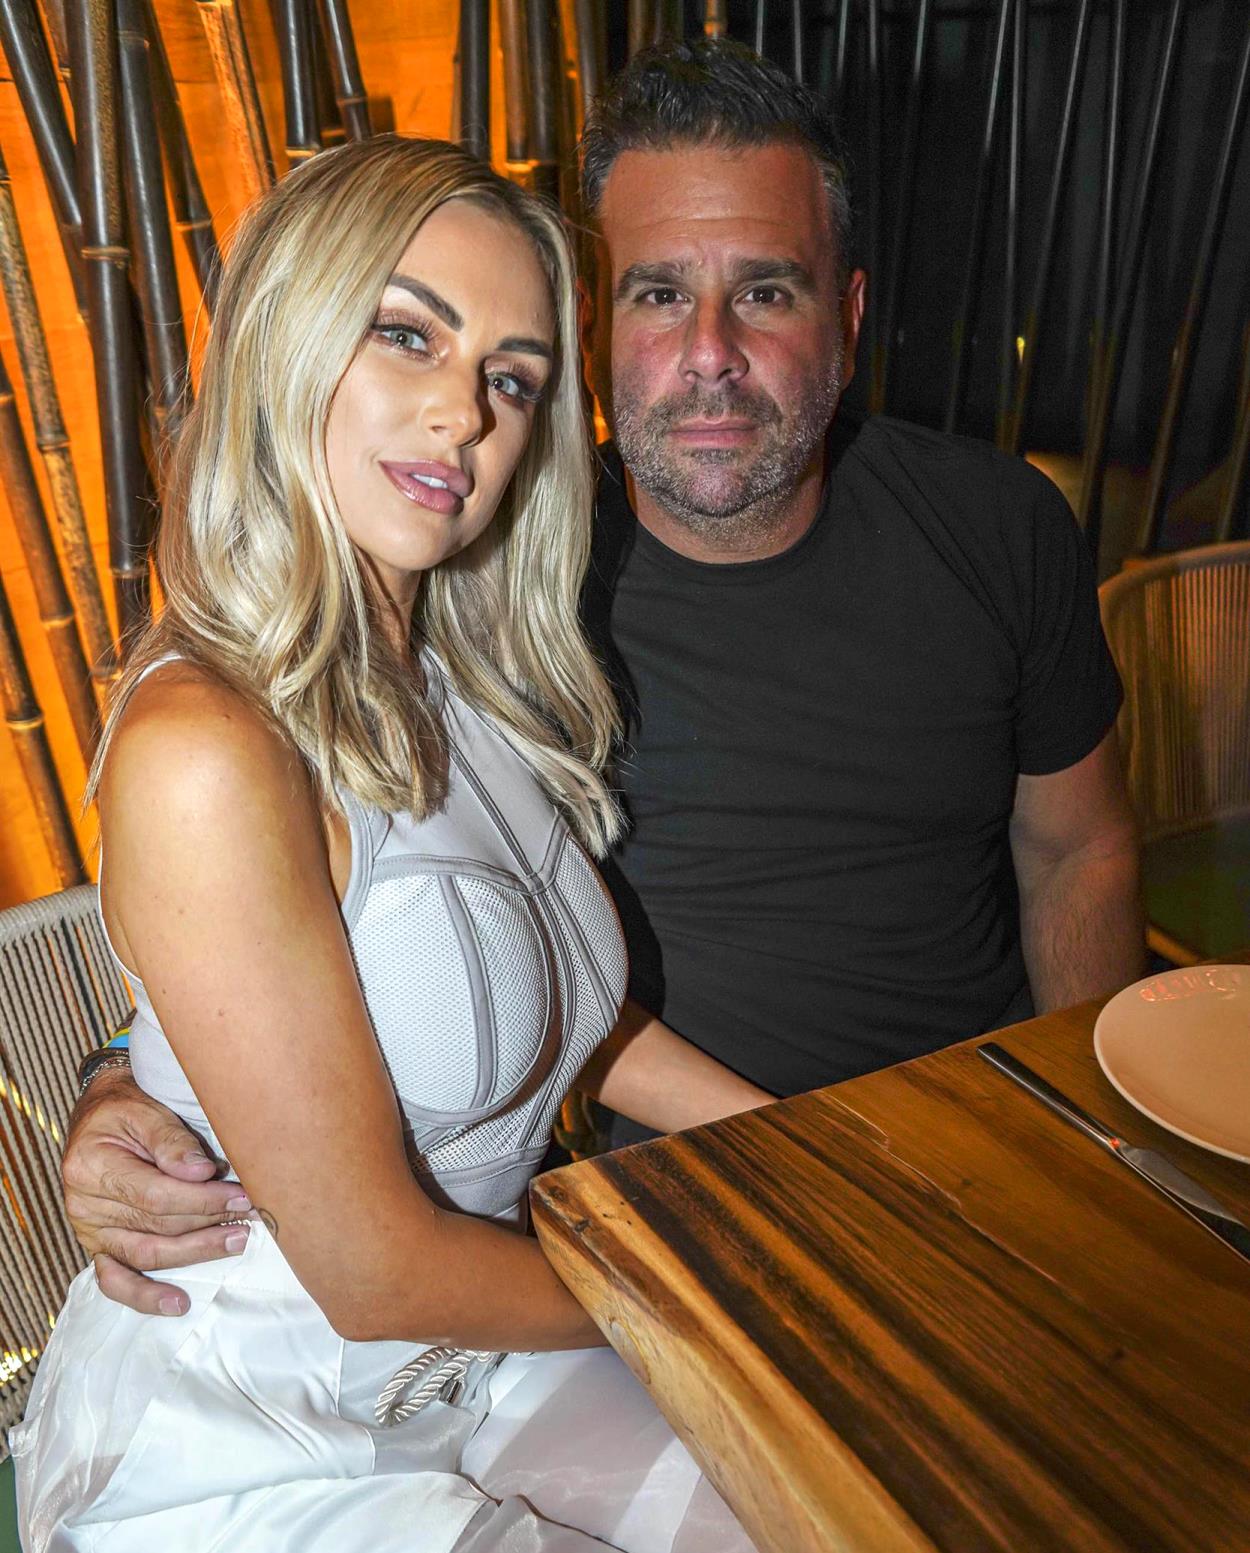 Lala Kent Claims Ex Randall Emmett "Tackled" Her 'To the Ground' After Alleged Affair as He's Accused of Casting Couch Practices and Paying Off Women